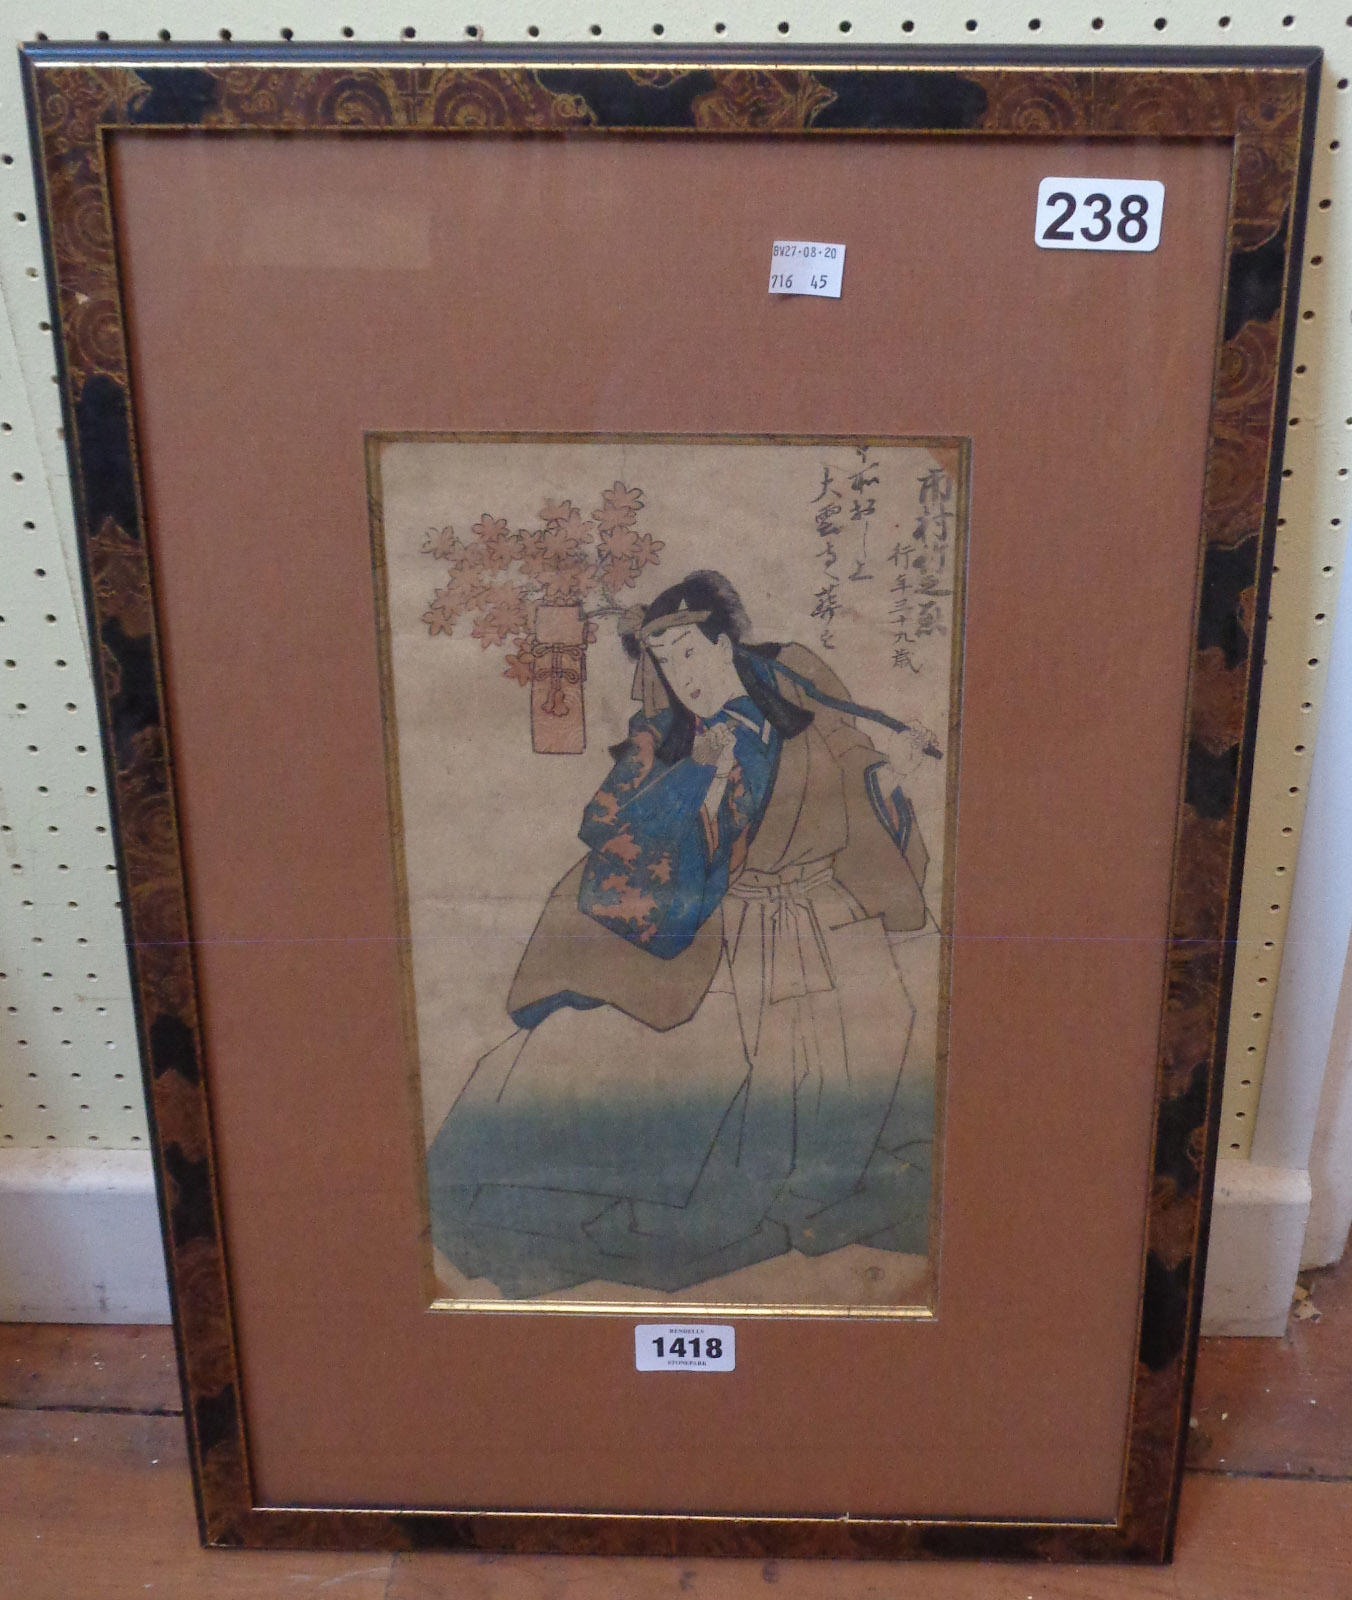 A lacquered framed Japanese wood block print, depicting a figure carrying a flowering branch with - Image 3 of 9